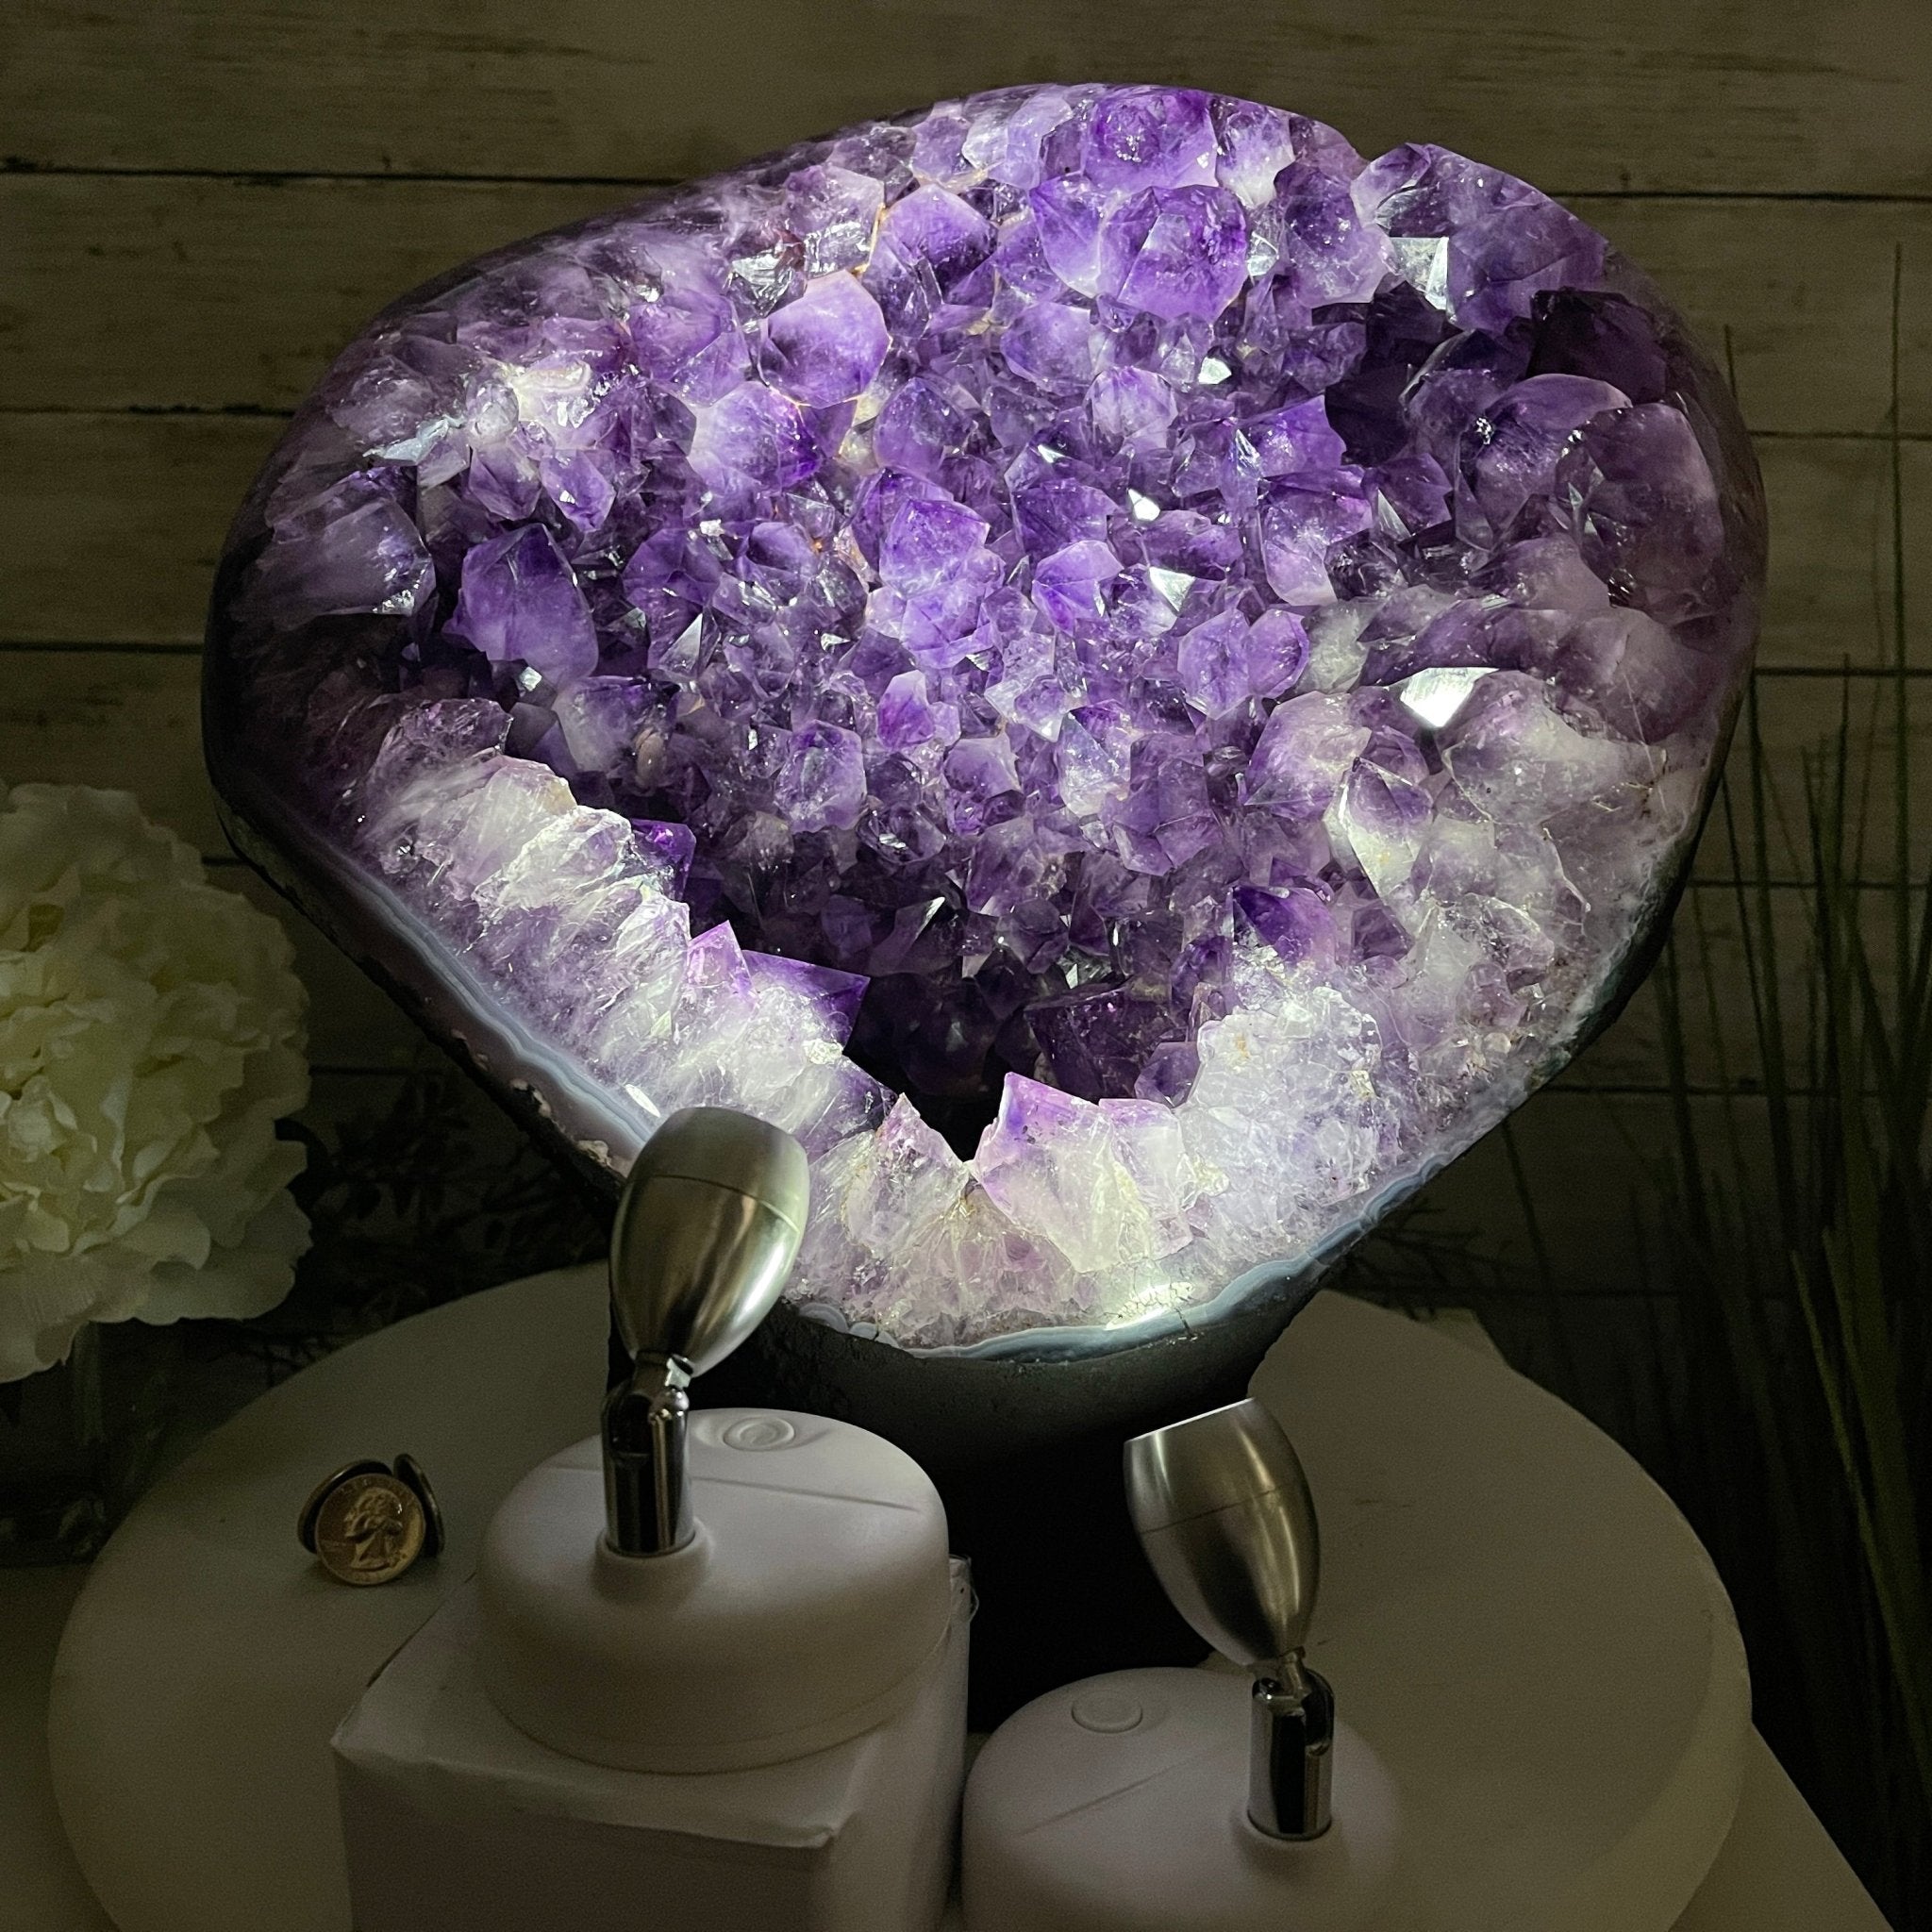 Extra Quality Amethyst Druse Cluster on Cement Base, 35 lbs and 12.5" Tall #5614-0051 - Brazil GemsBrazil GemsExtra Quality Amethyst Druse Cluster on Cement Base, 35 lbs and 12.5" Tall #5614-0051Clusters on Cement Bases5614-0051